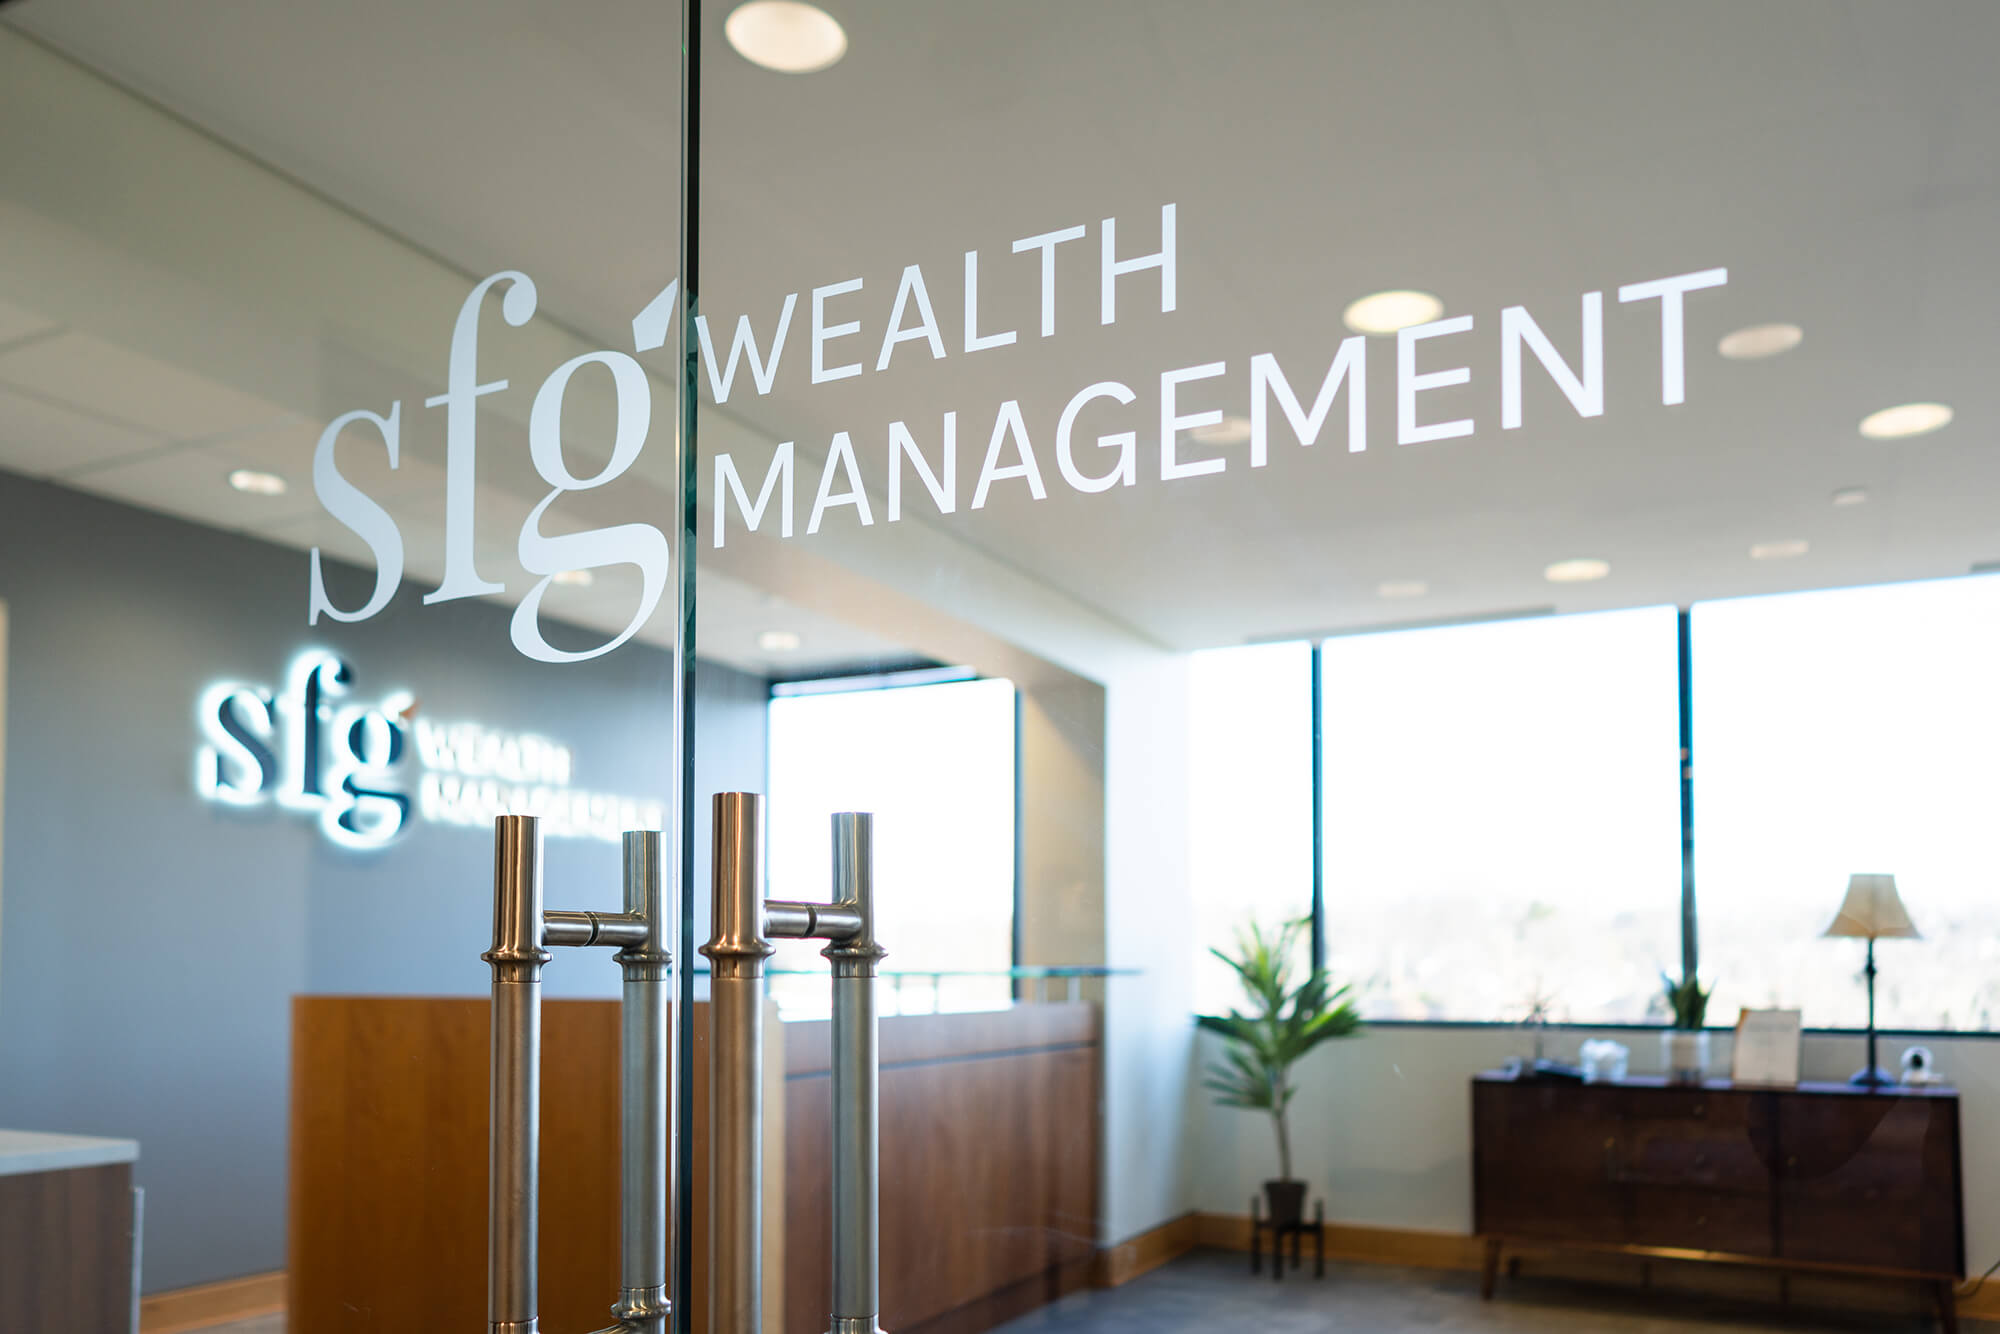 About LPL Financial Advisory Services | SFG Wealth Management